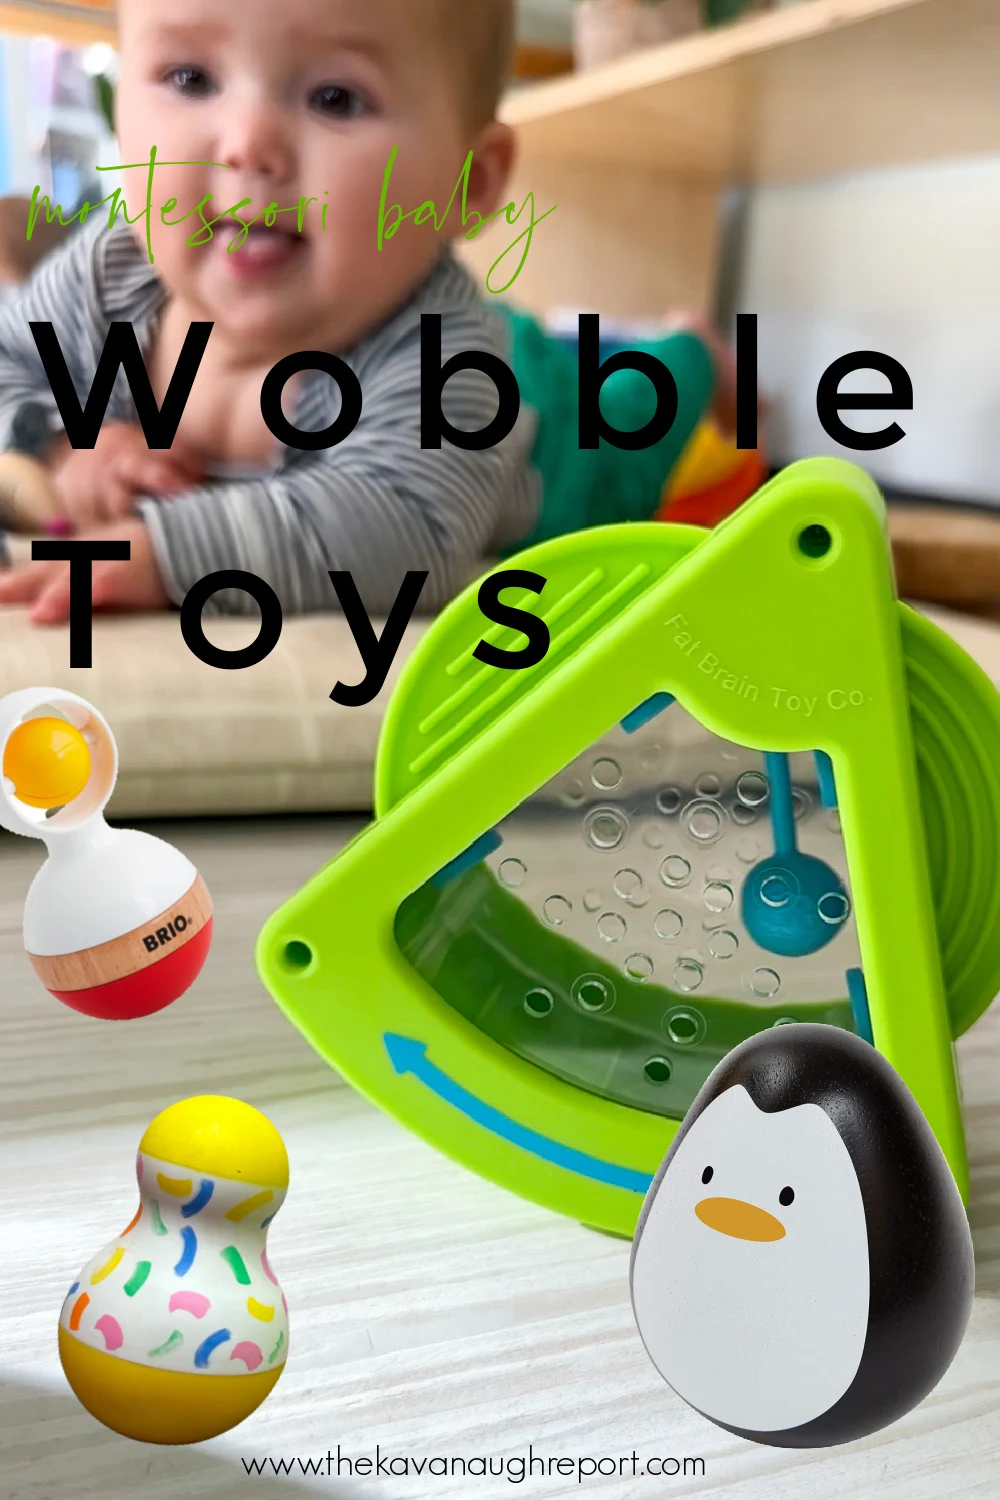 Wobble toys are a perfect option for babies that are learning to creep and army crawl. Here are some Montessori friendly options.